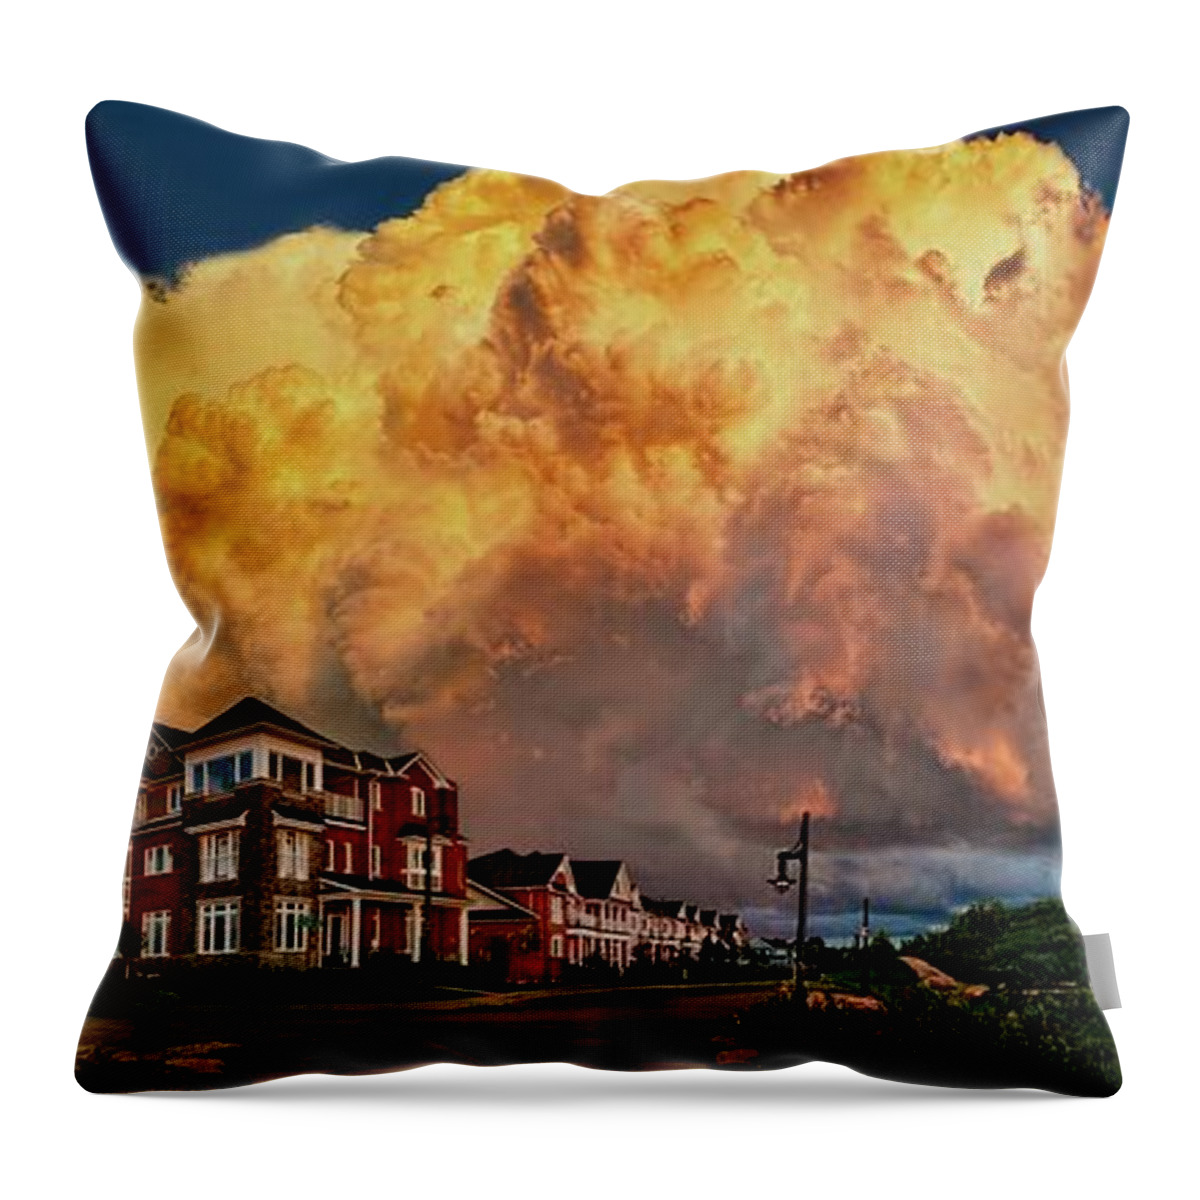 Perspective Throw Pillow featuring the digital art Fire in the Sky by Jeff S PhotoArt